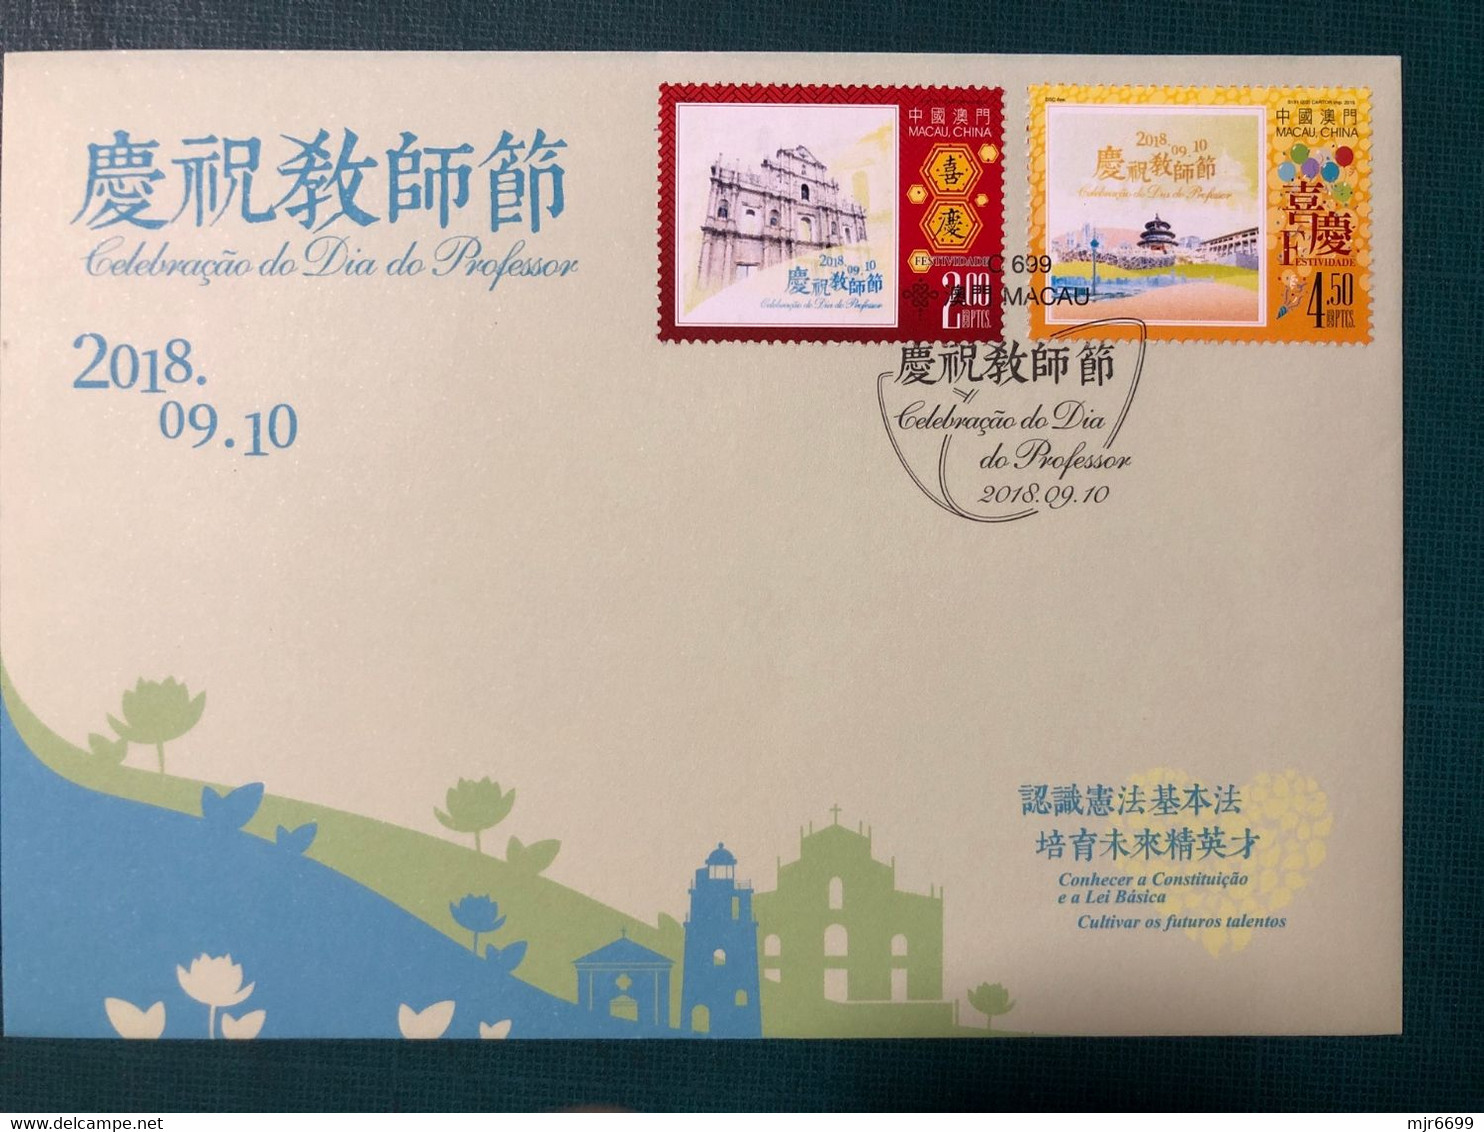 2018 TEACHER DAY SPECIAL COMMEMORATIVE COVER WITH SPECIAL PERSONALIZED STAMP, RARE - Covers & Documents